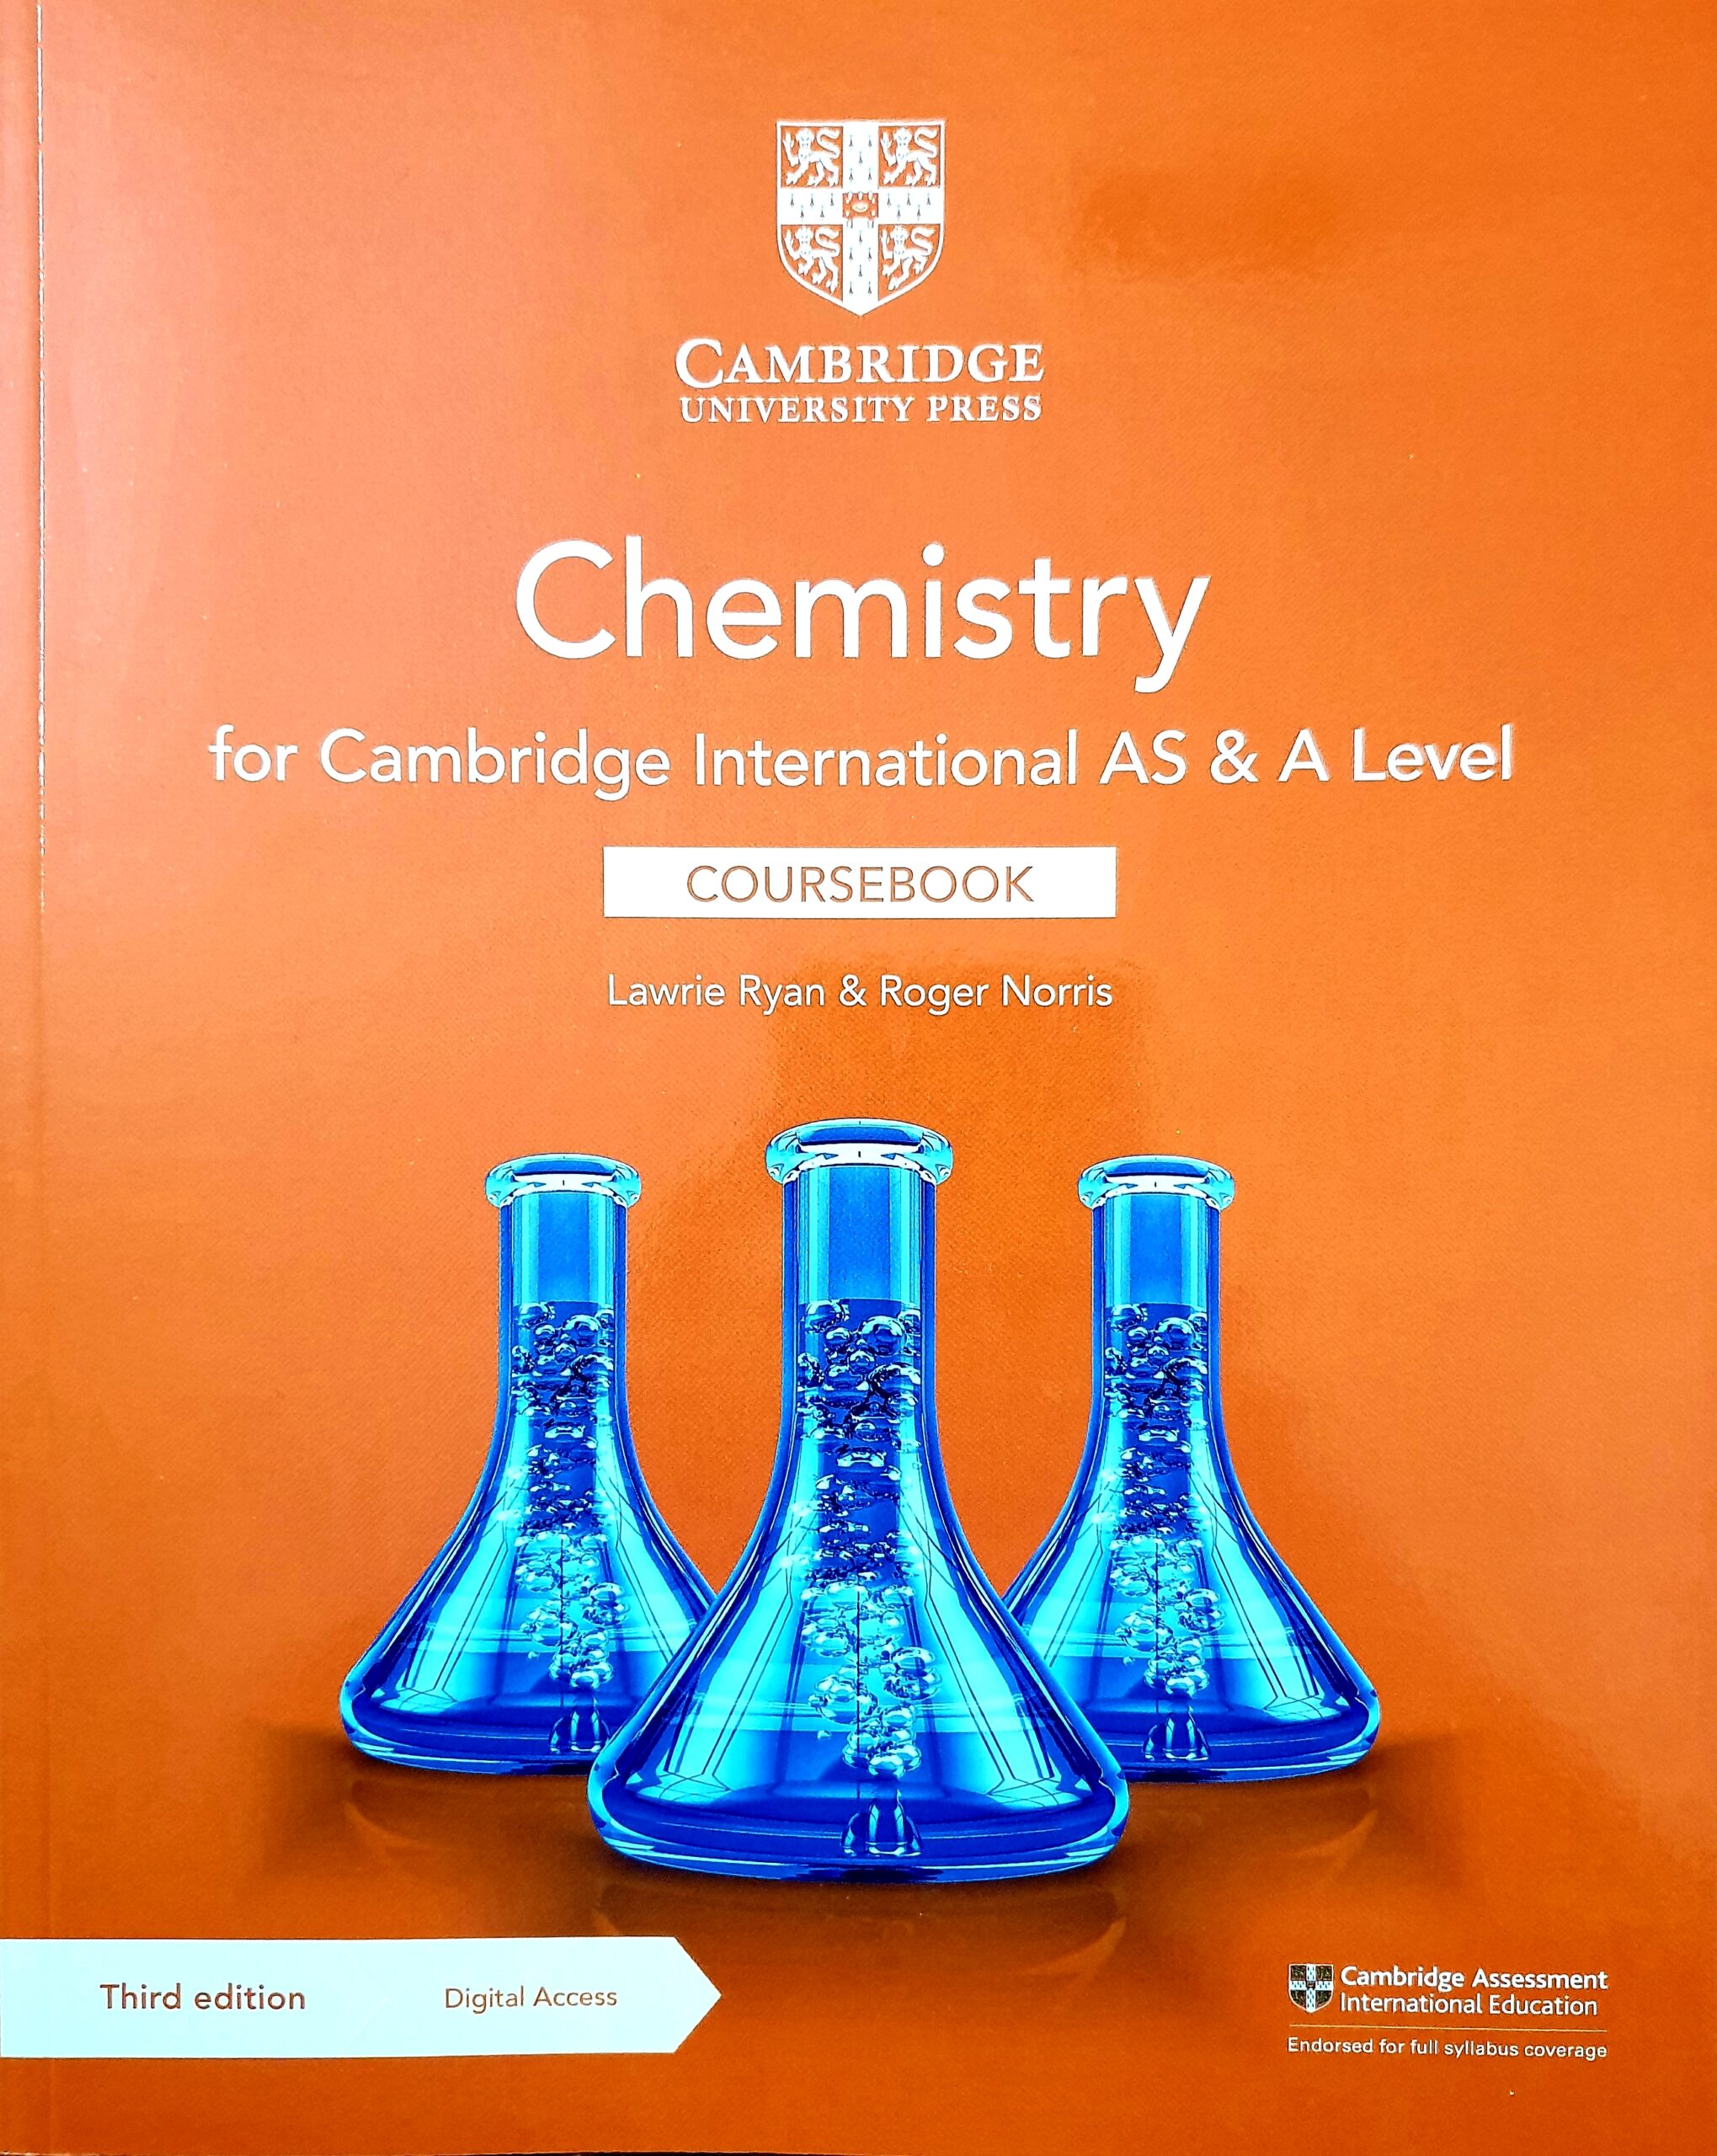 Cambridge International AS and A Level Chemistry Coursebook (3rd Edition) By Lawrie Ryan & Roger Norris